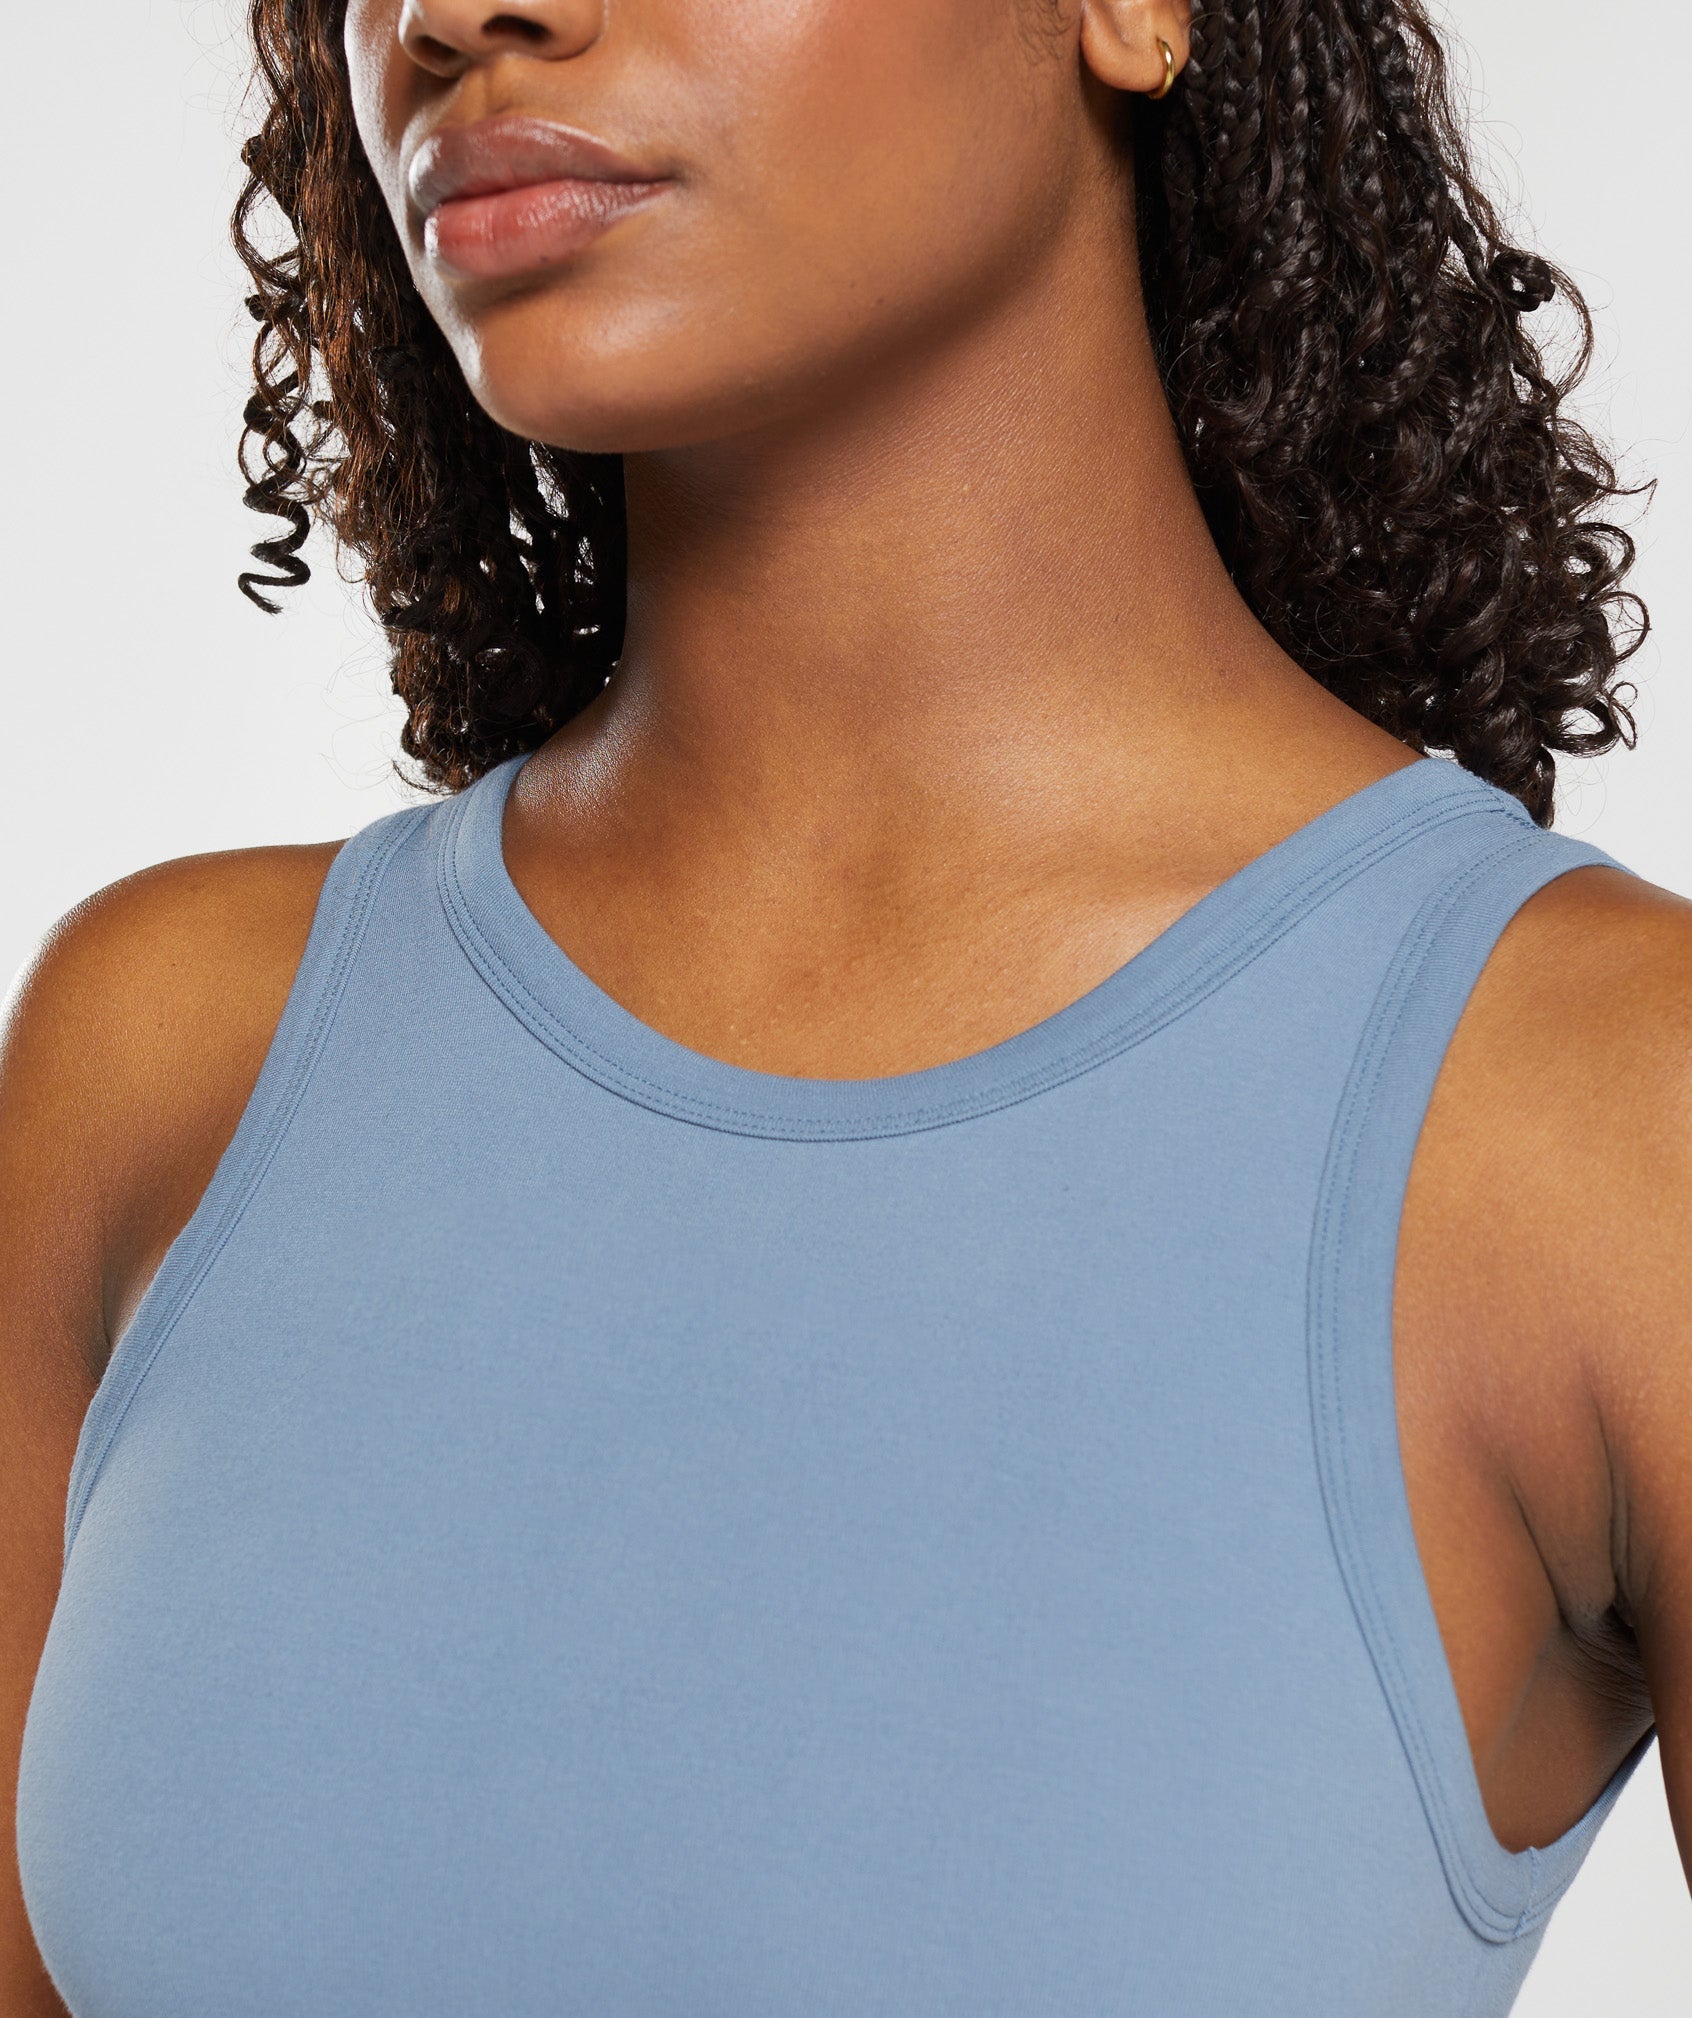 Gymshark Ribbed Cotton Seamless Body Fit Tank - Faded Blue